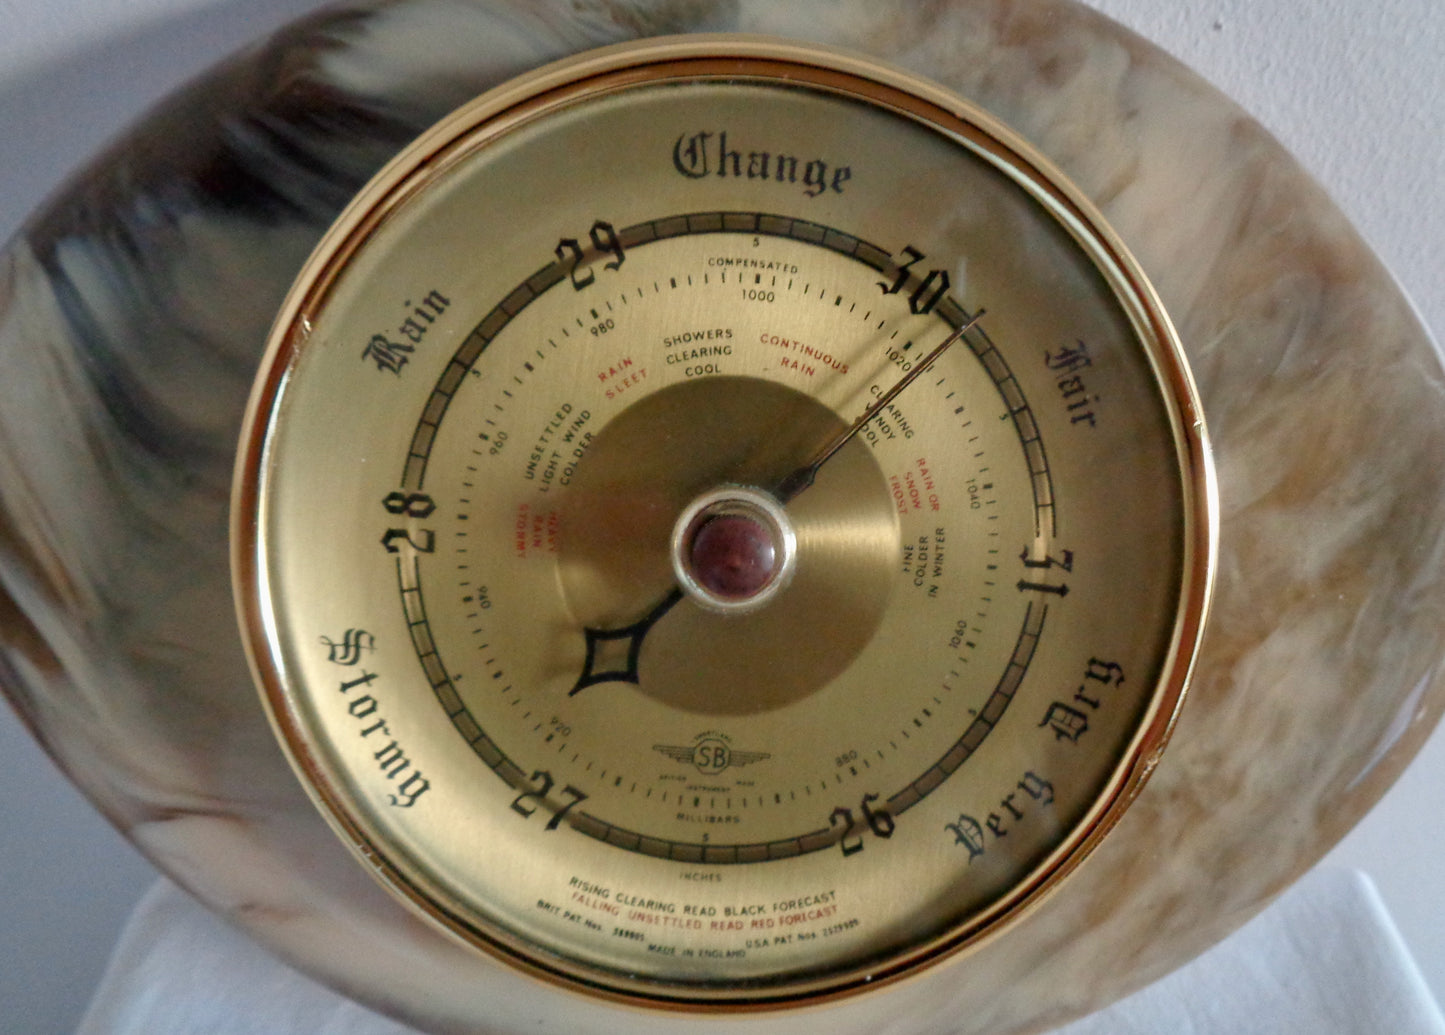 Vintage Shortland SB Aneroid Barometer With Brass Finish / Faux Onyx Surround